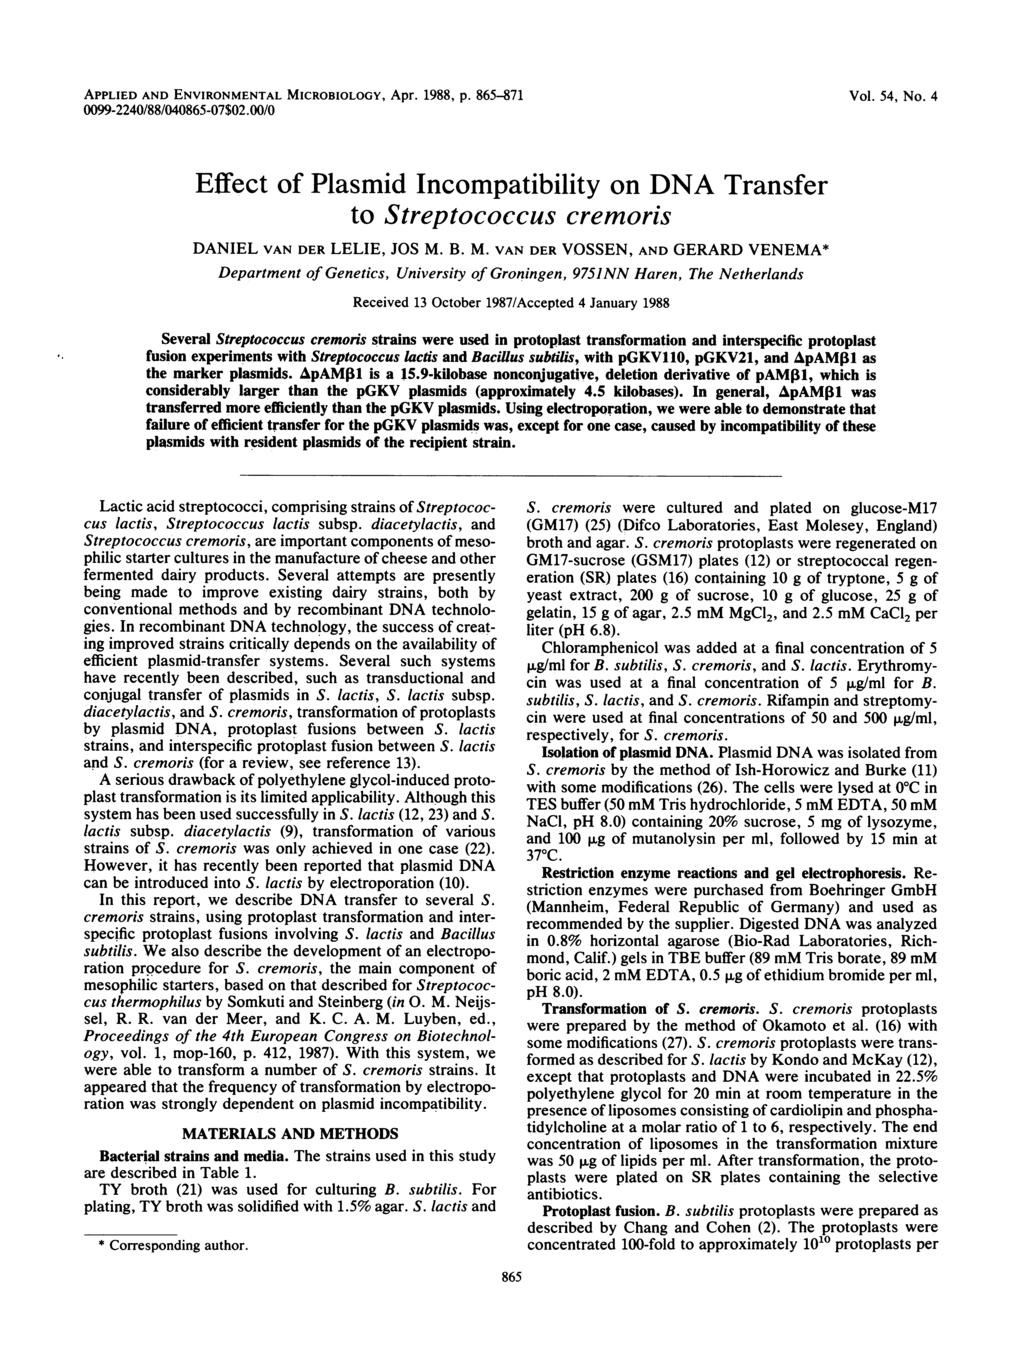 APPLIED AND ENVIRONMENTAL MICROBIOLOGY, Apr. 1988, p. 865-871 0099-2240/88/040865-07$02.00/0 Vol. 54, No.